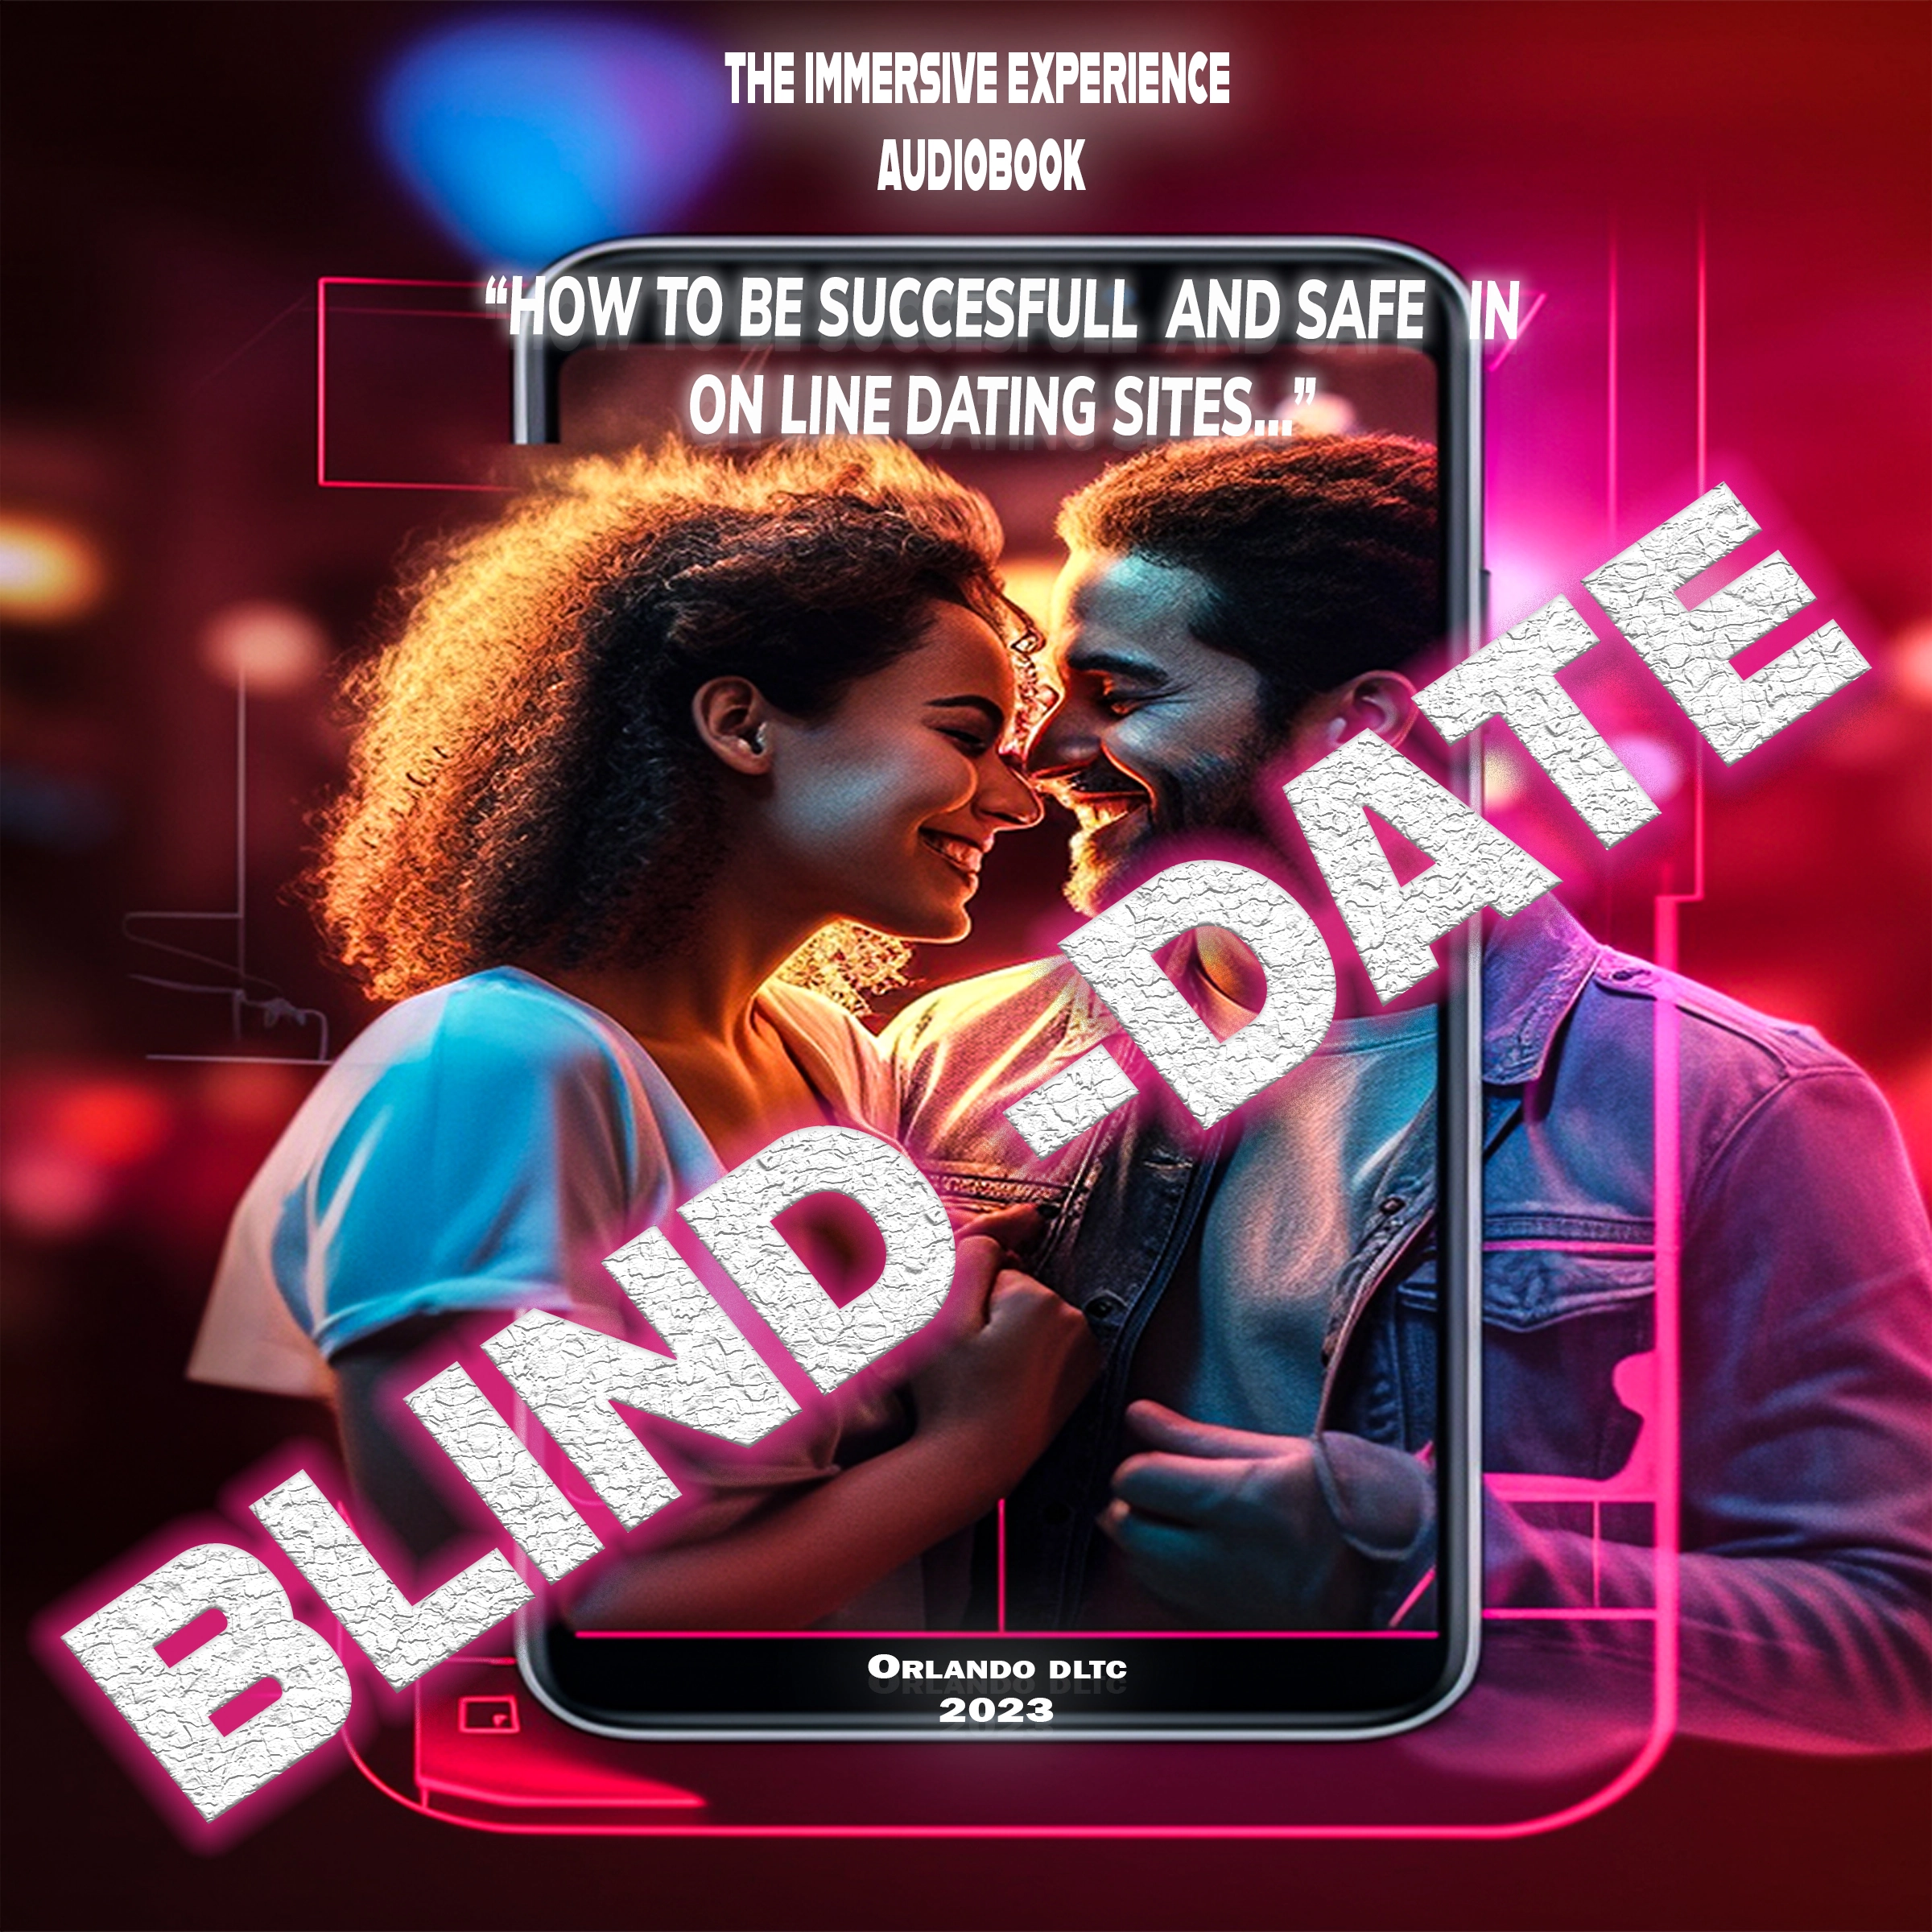 Blind Date: How to be successful and safe in on-line dating sites. Audiobook by Orlando De la torre Cepeda